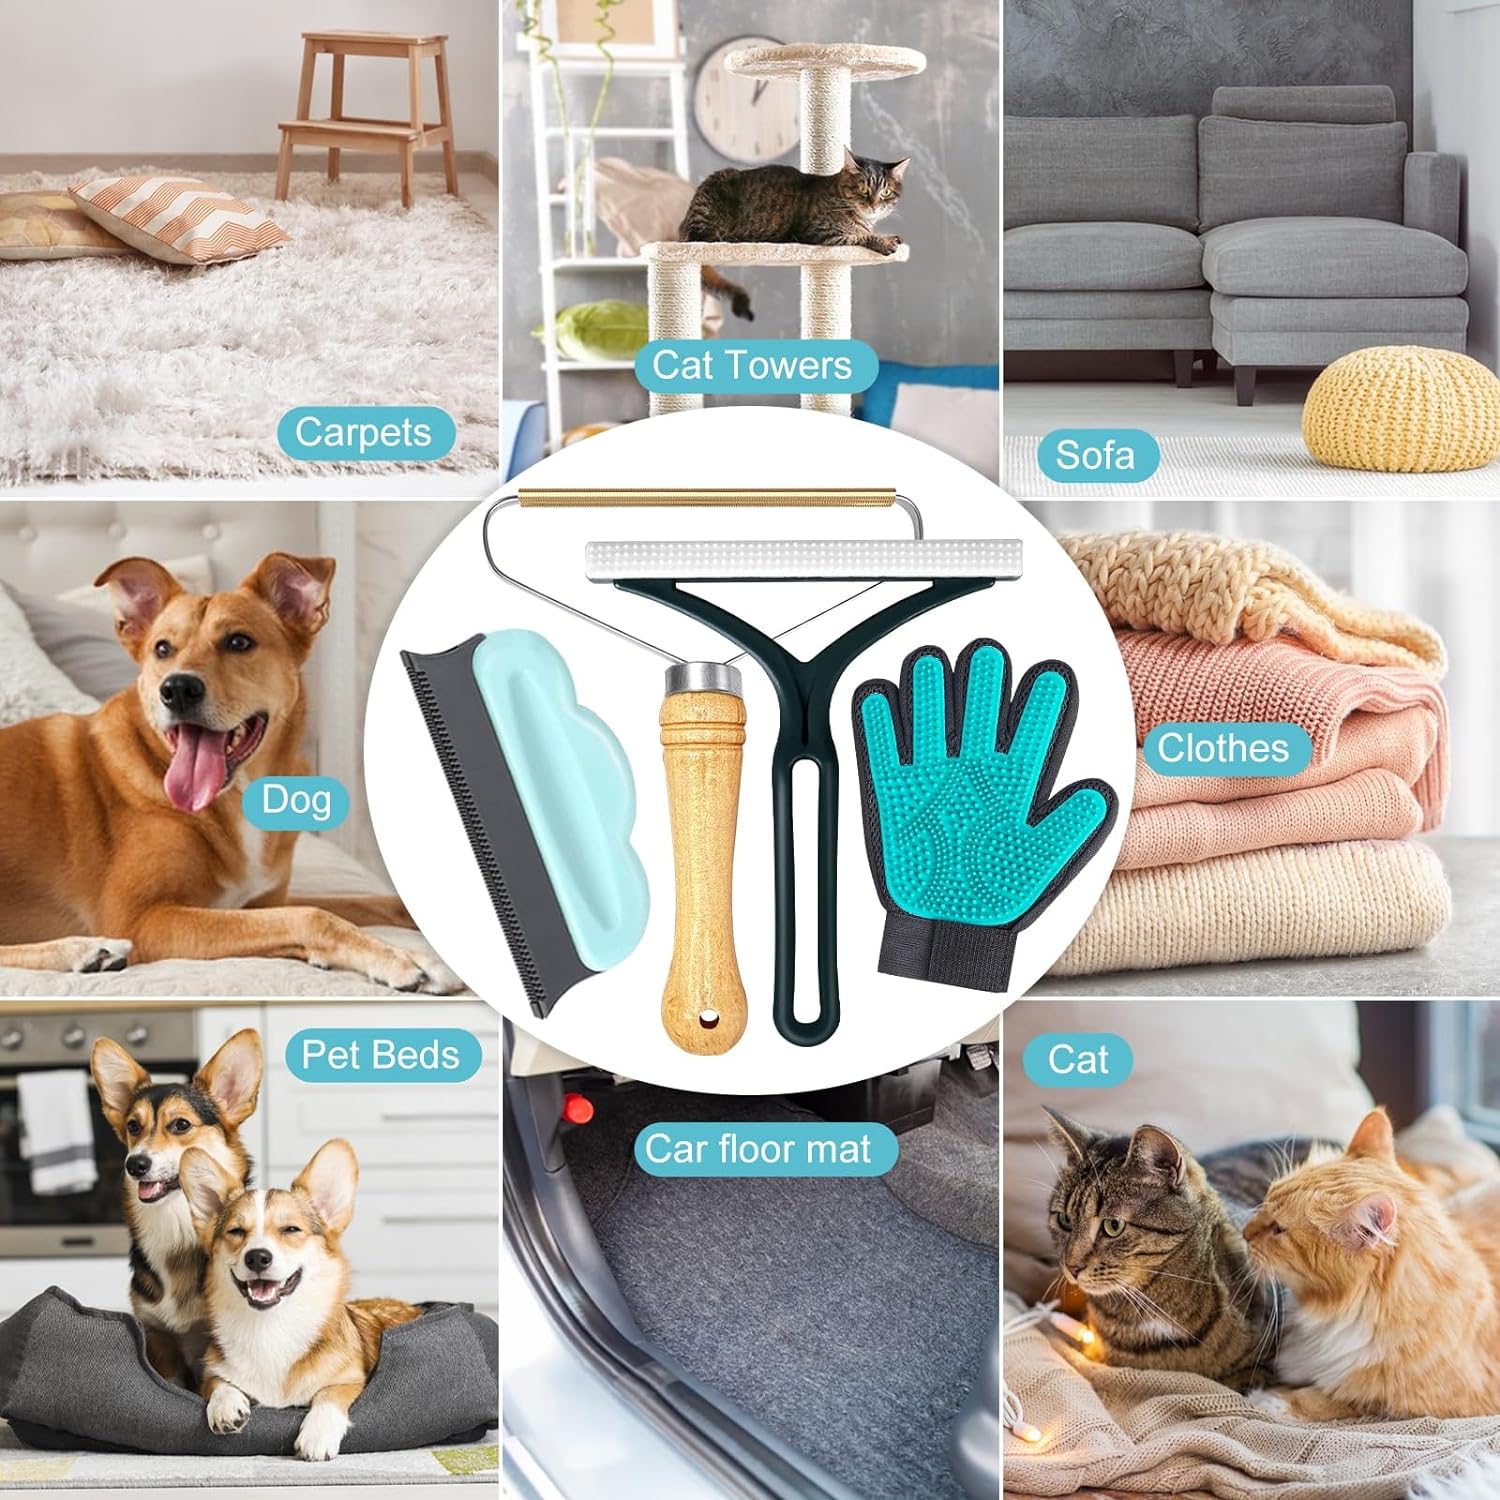 Pet Hair Remover for Couch: Pet Hair Remover for Laundry Car Carpet Clothes Dog Hair Remover Brush Cat Hair Remover Tool - Animal Hair Remover for Furniture